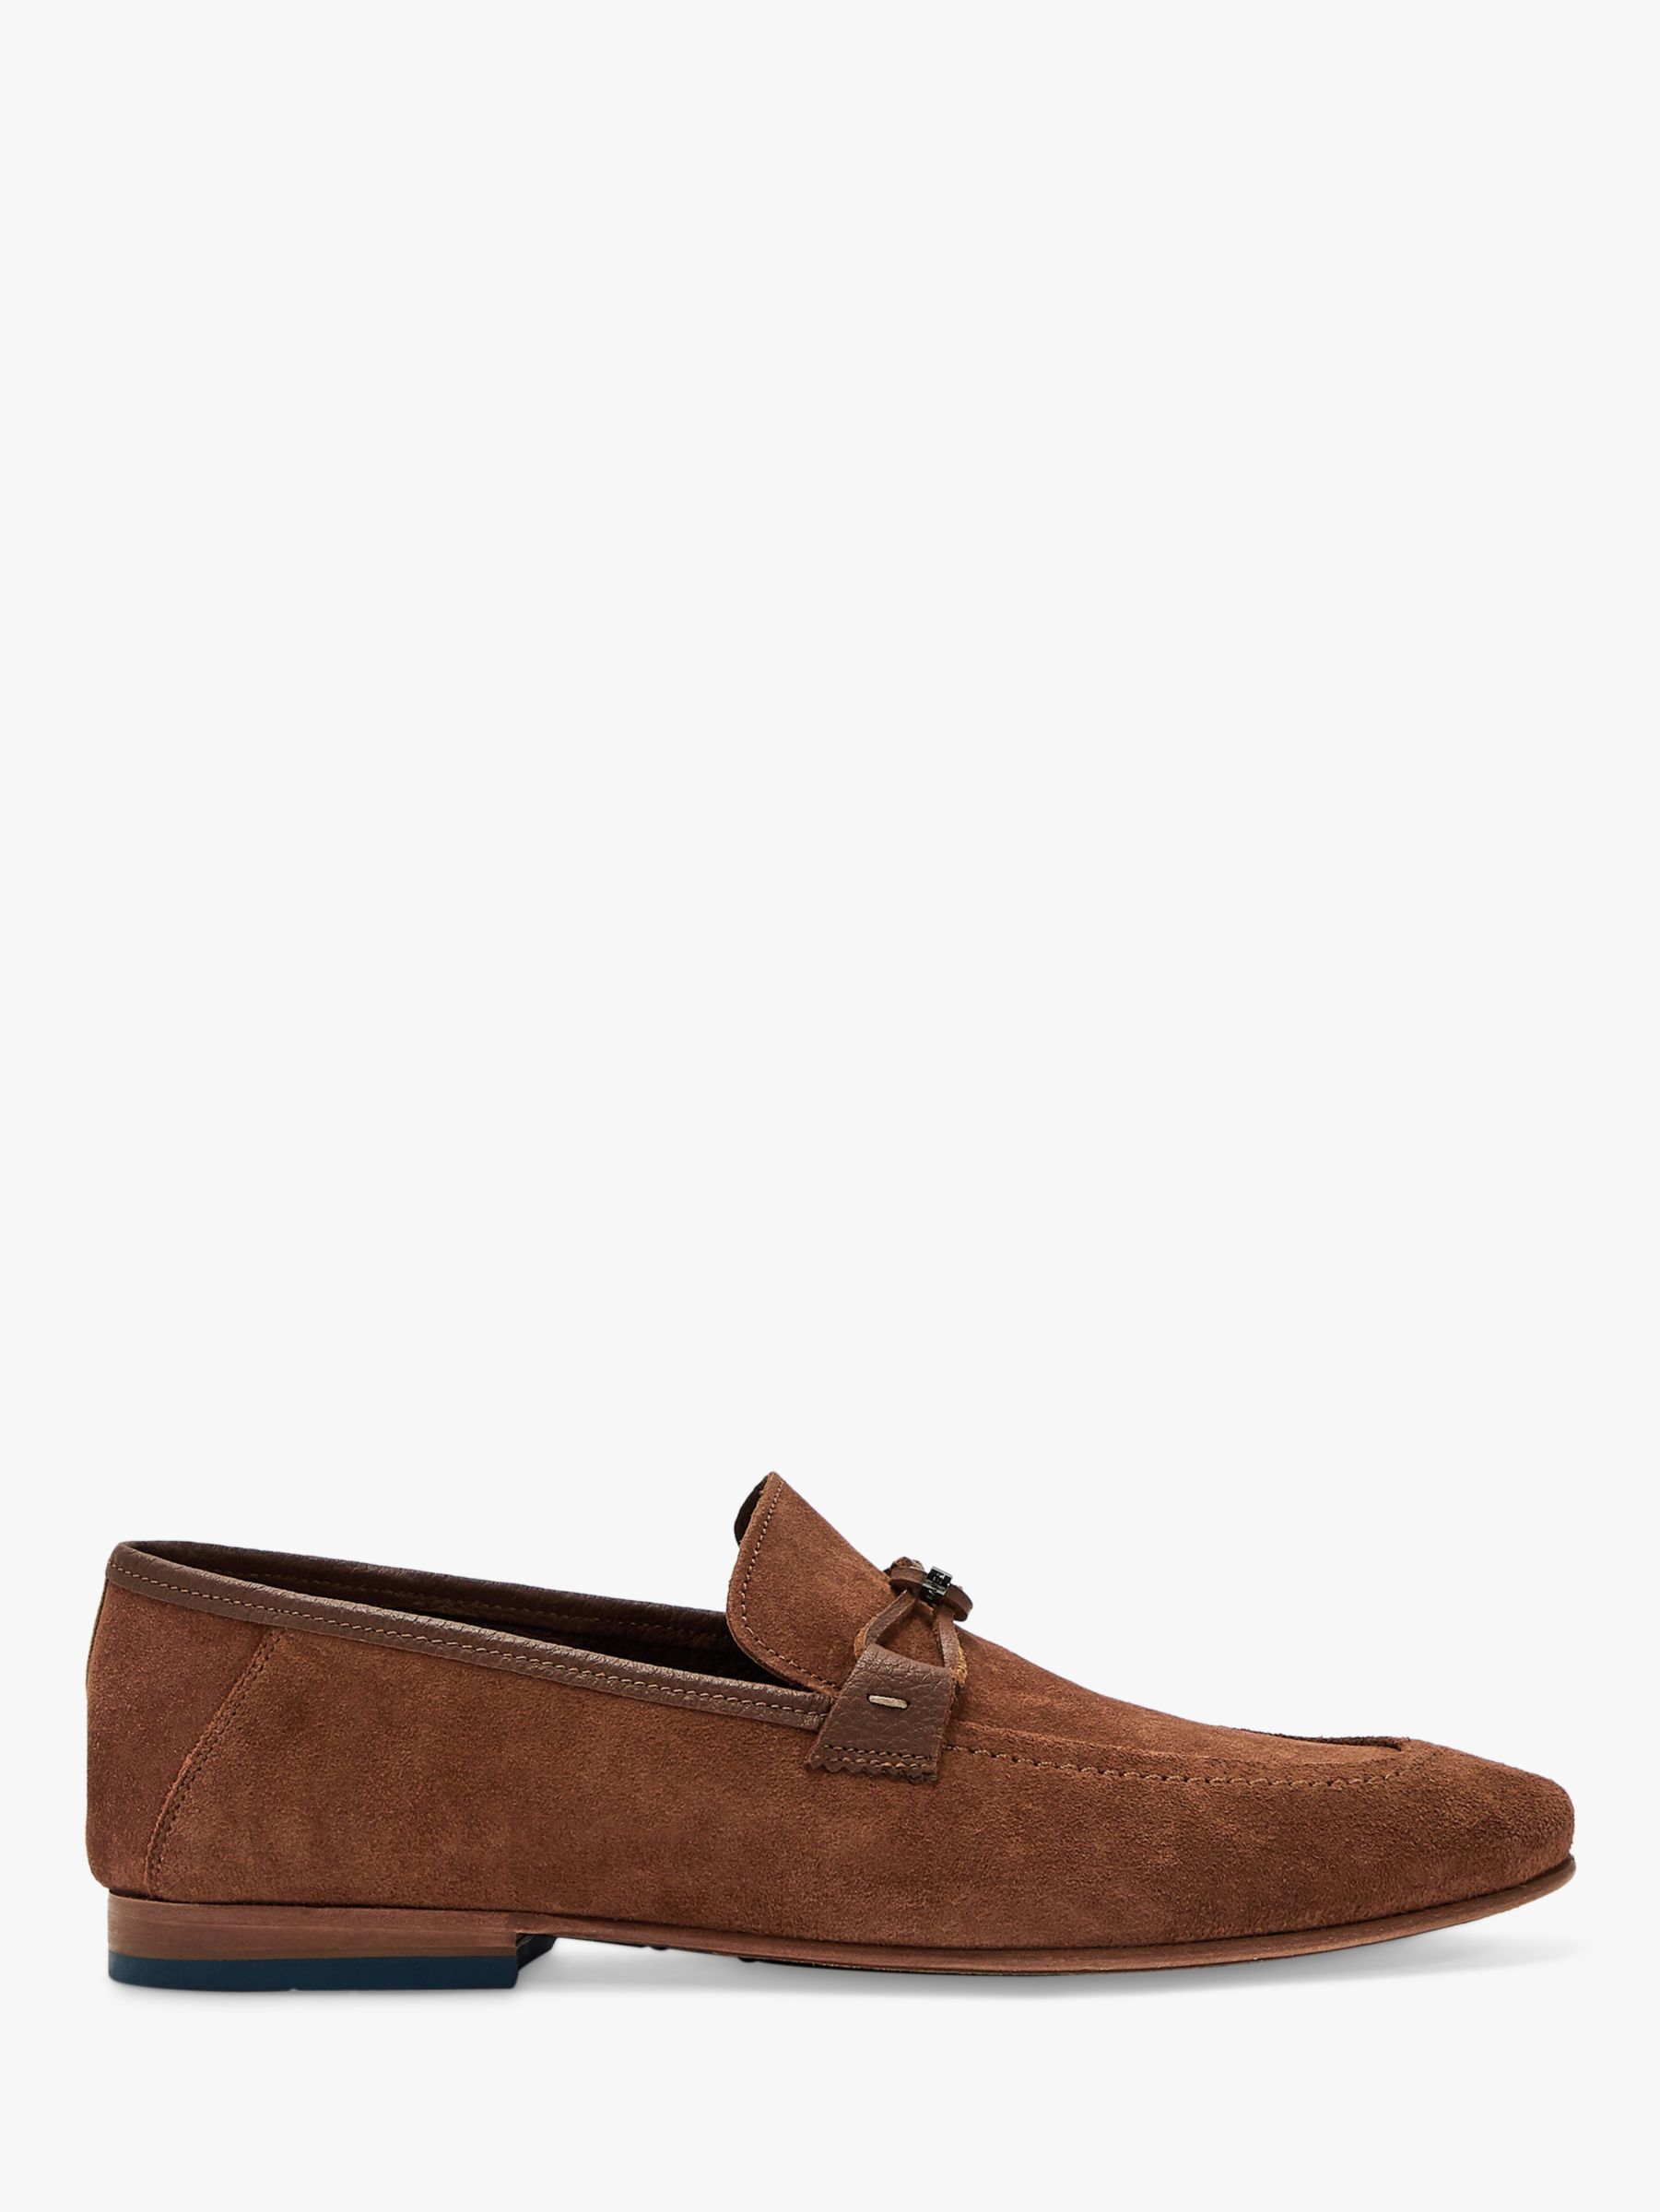 Ted Baker Siblac Suede Loafers, Tan at John Lewis & Partners